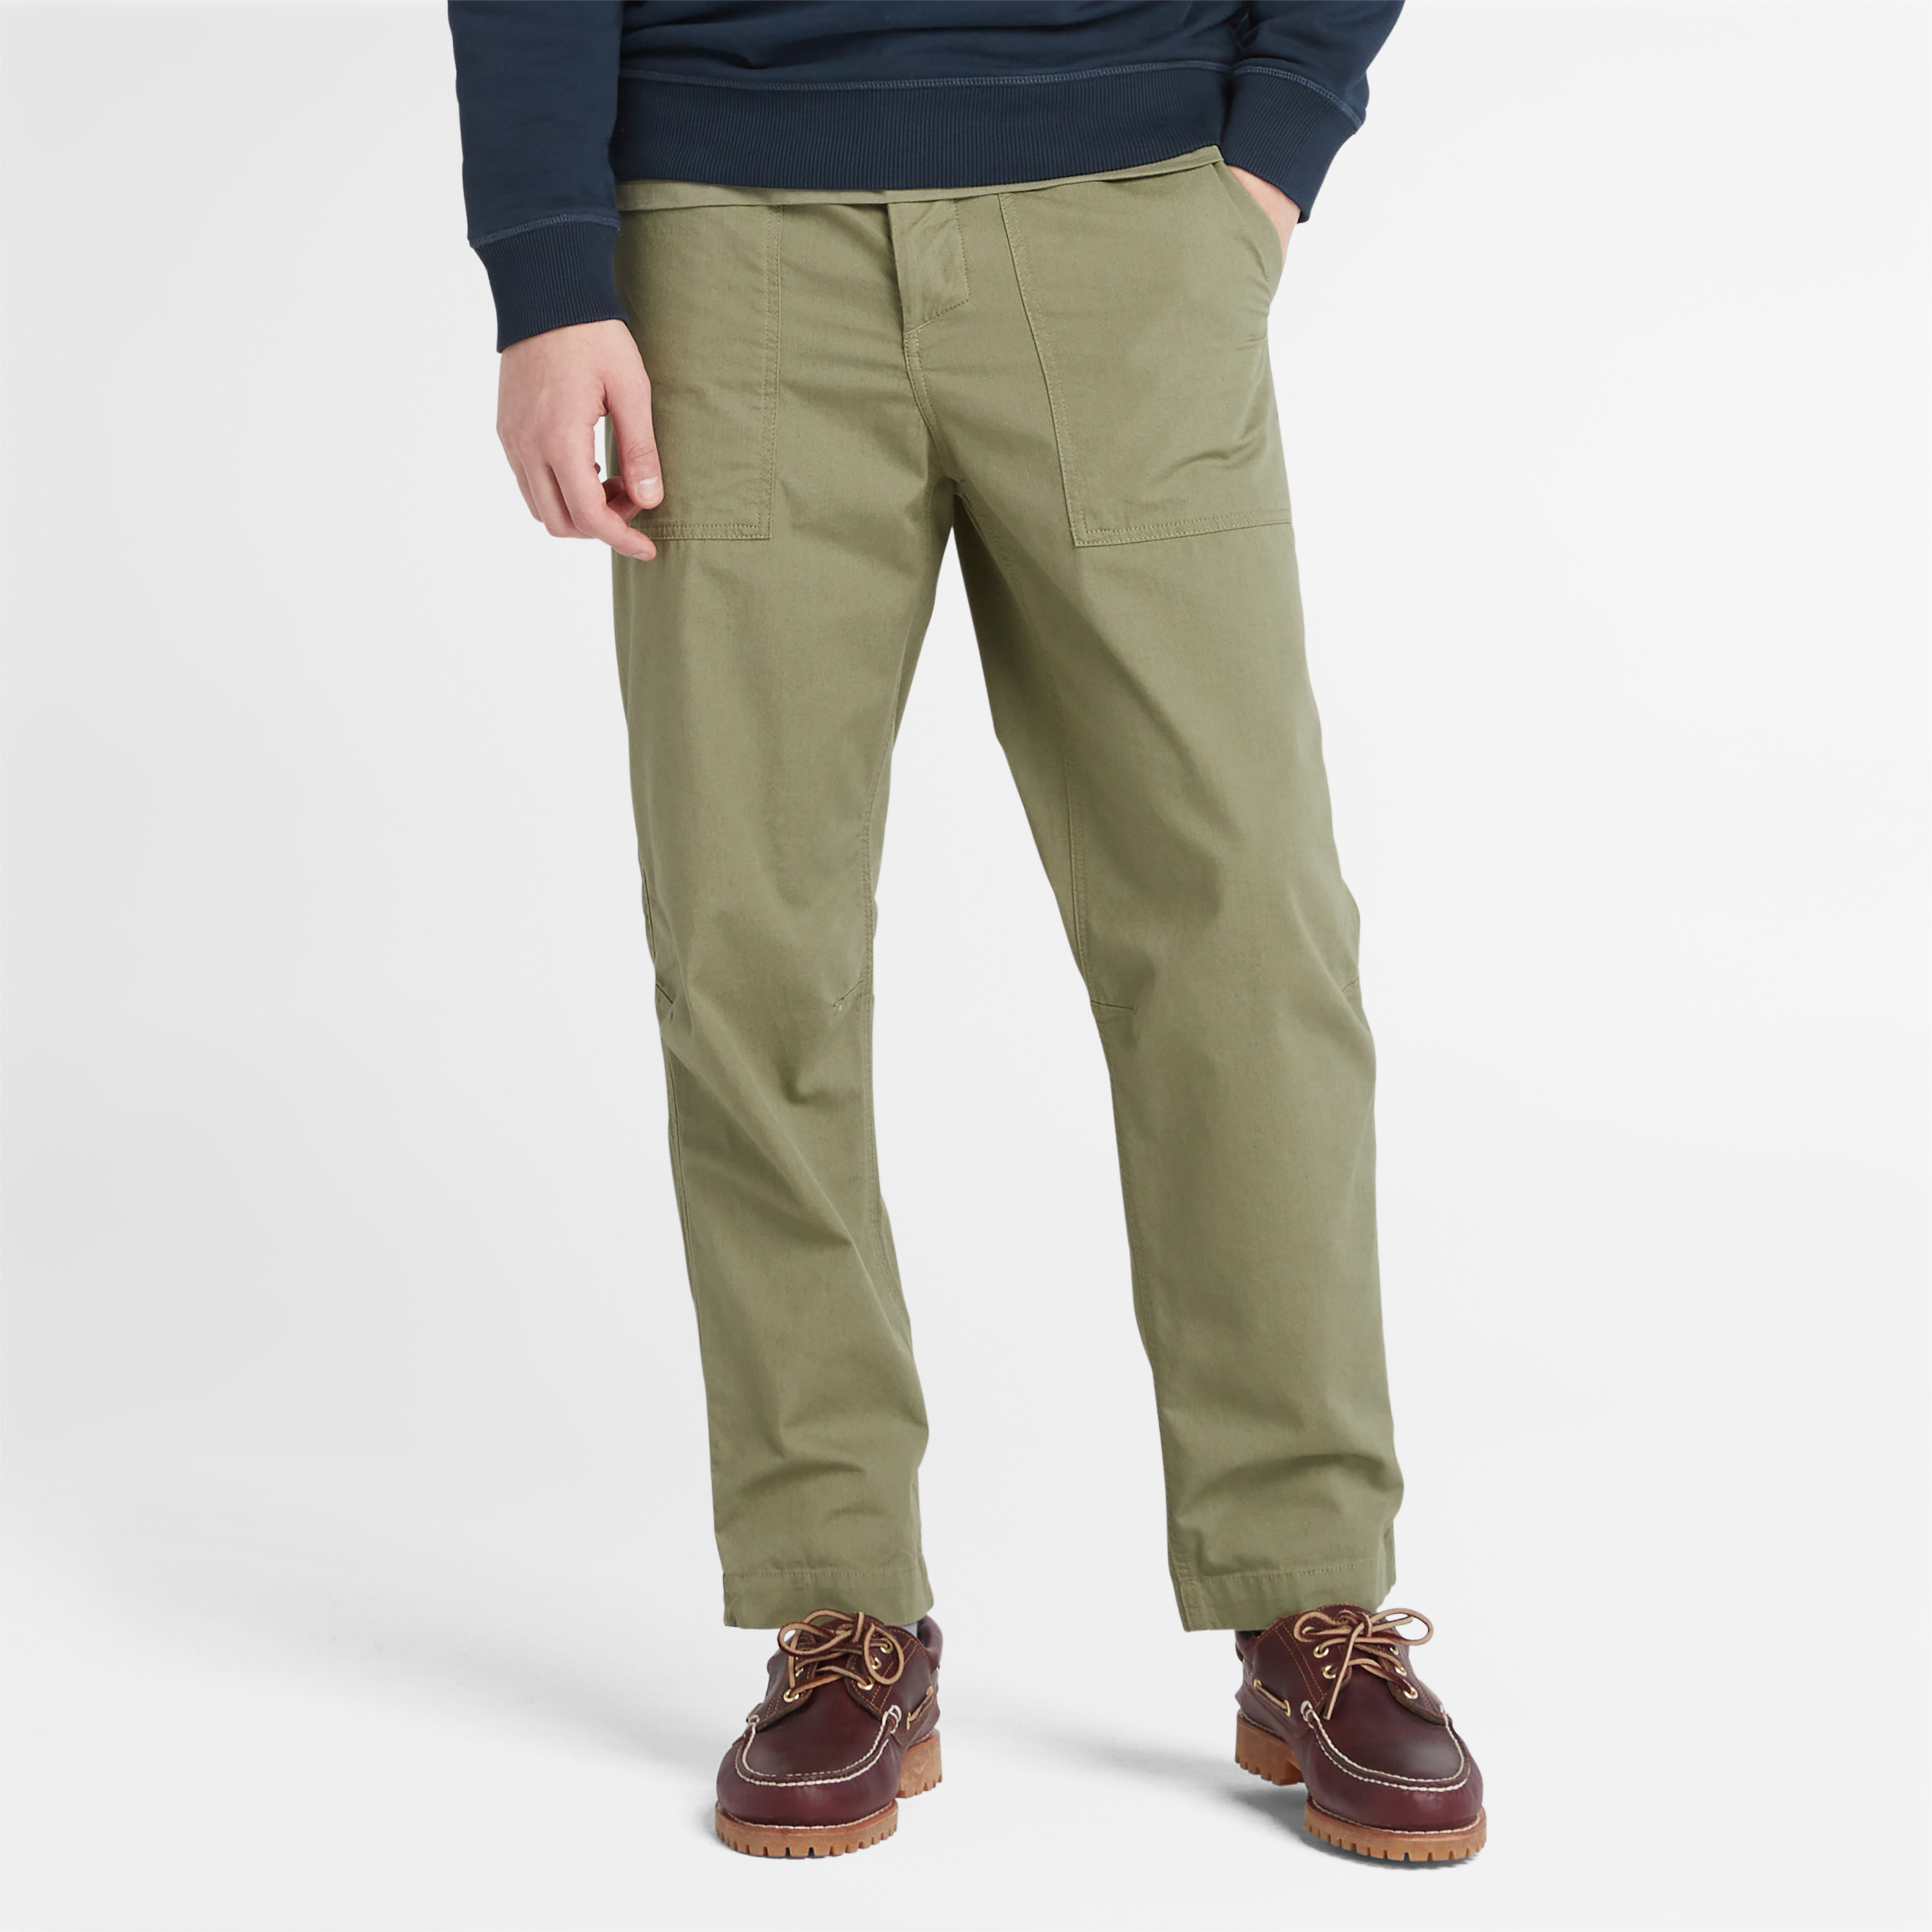 Men's Wide Tapered Fatigue Pants - Timberland - Singapore